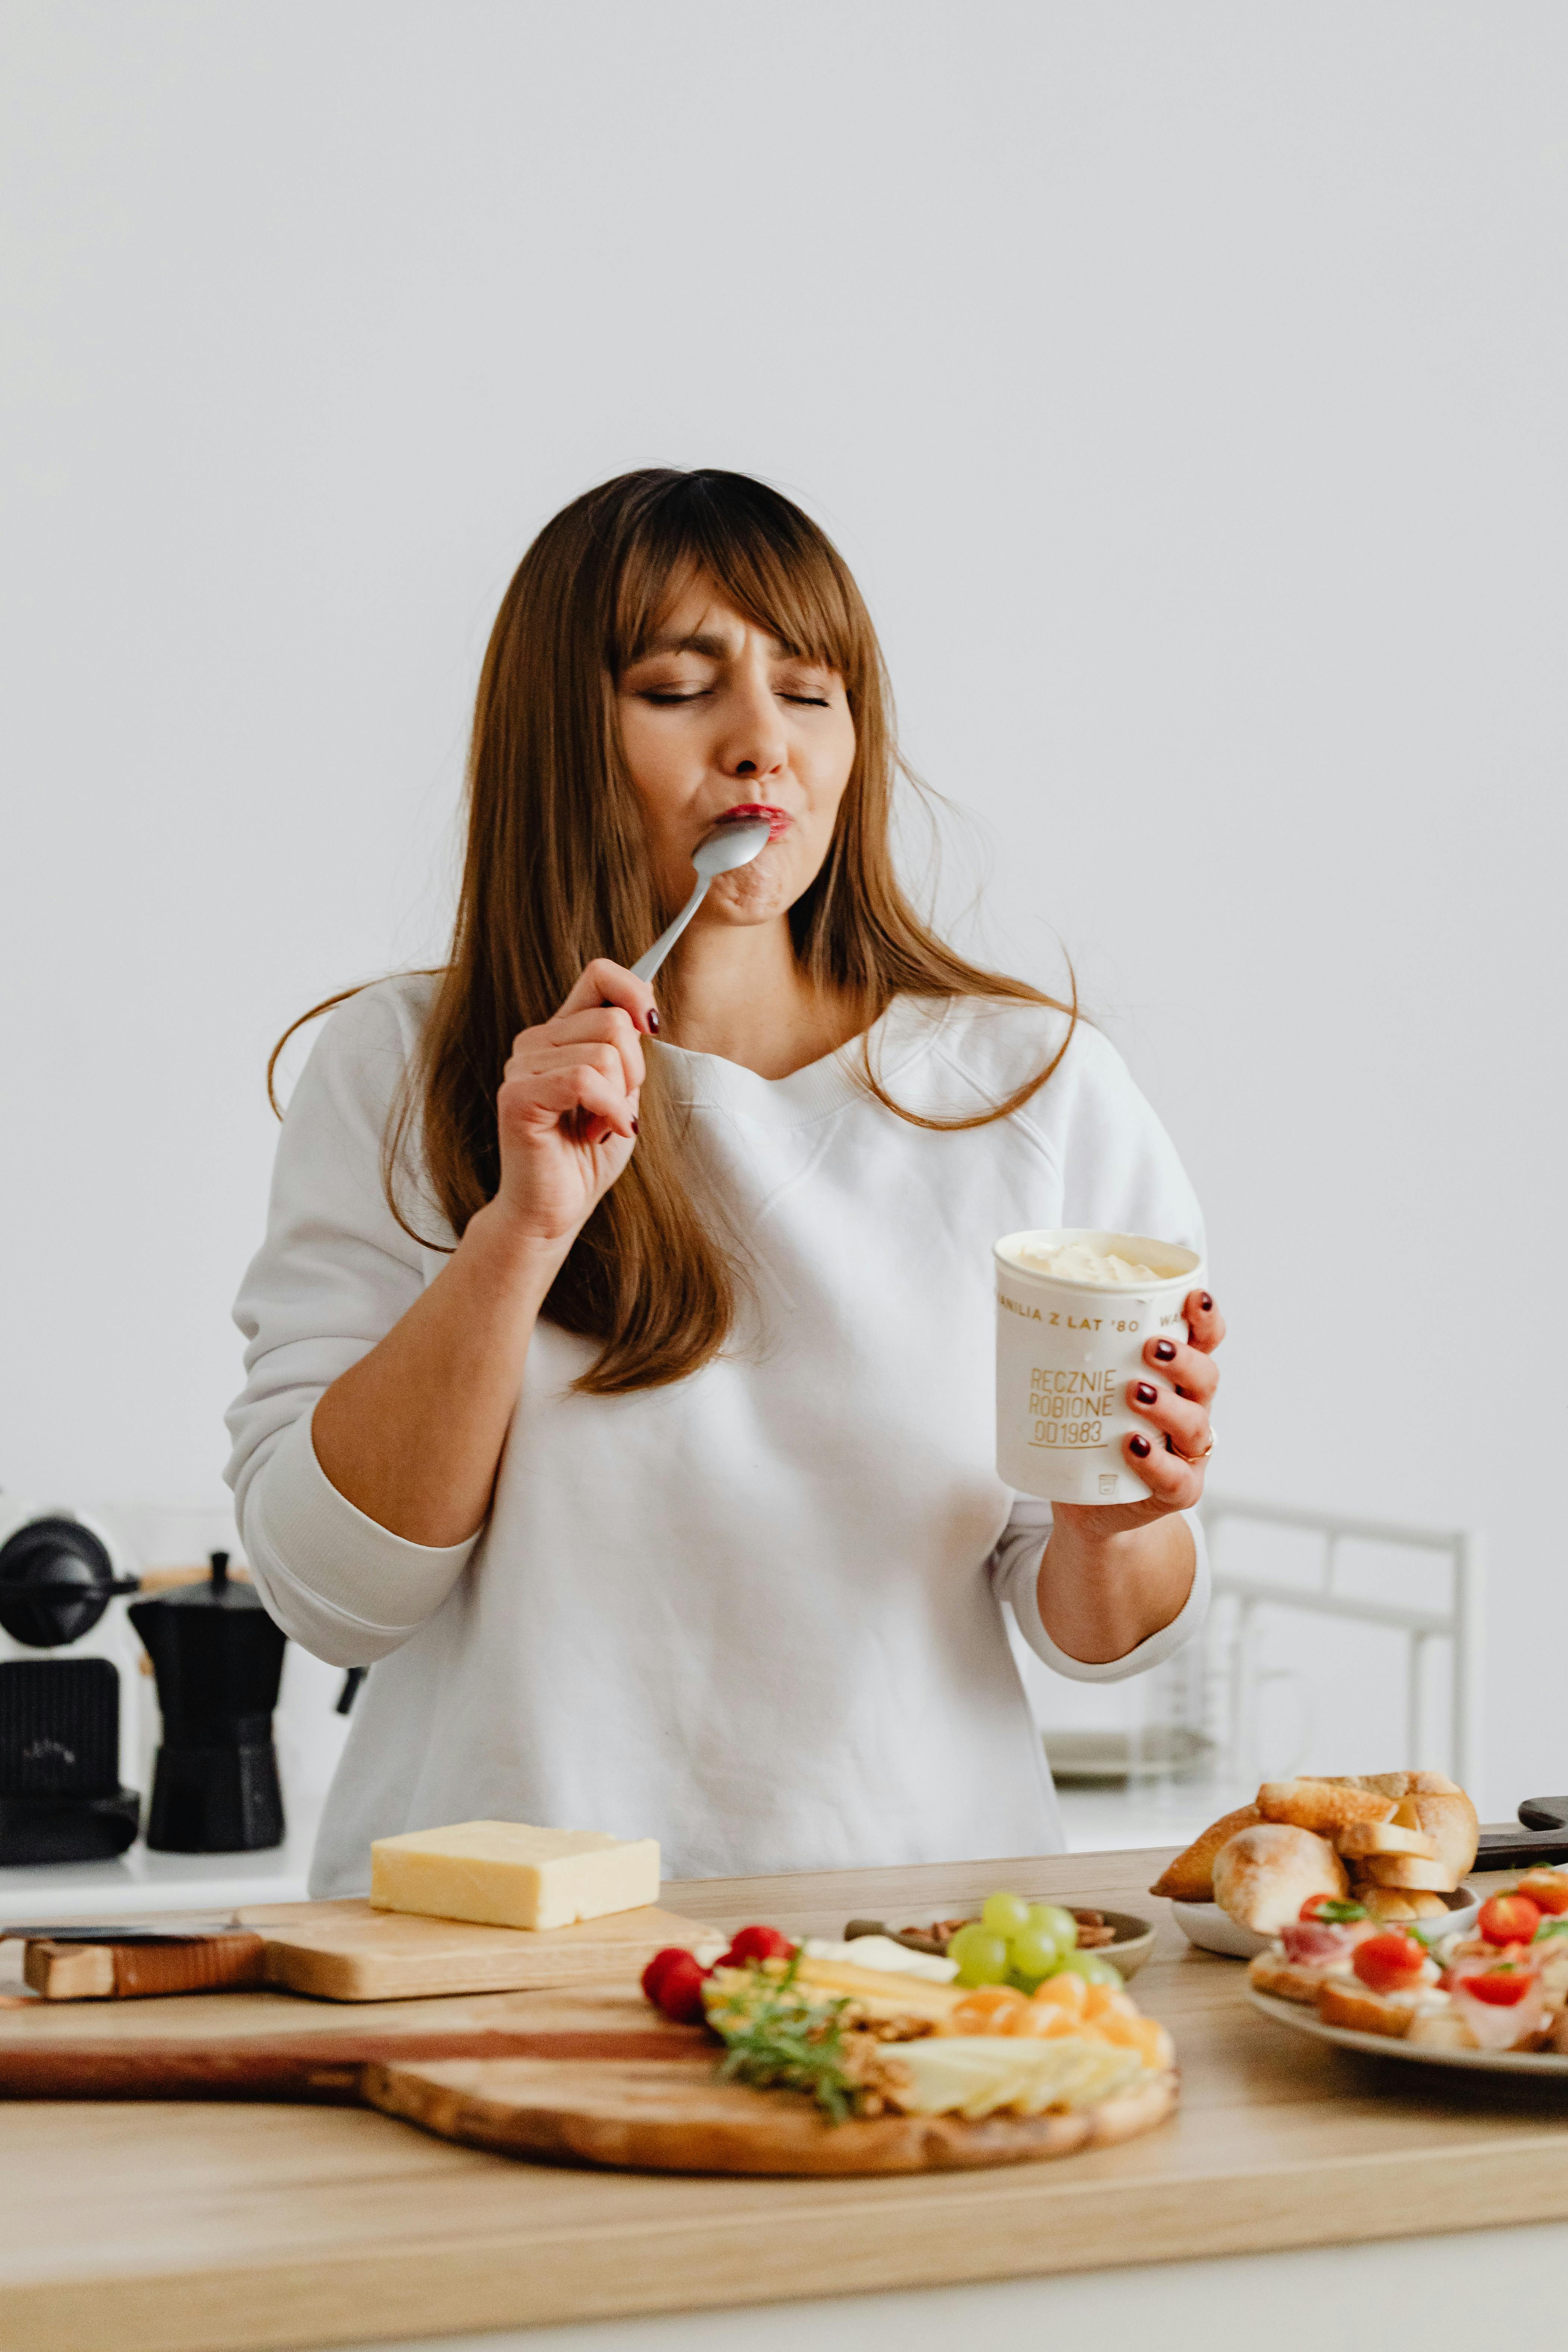 Free Photo of a Woman Holding a Cup of Ice Cream While Her Eyes are Closed Stock Photo